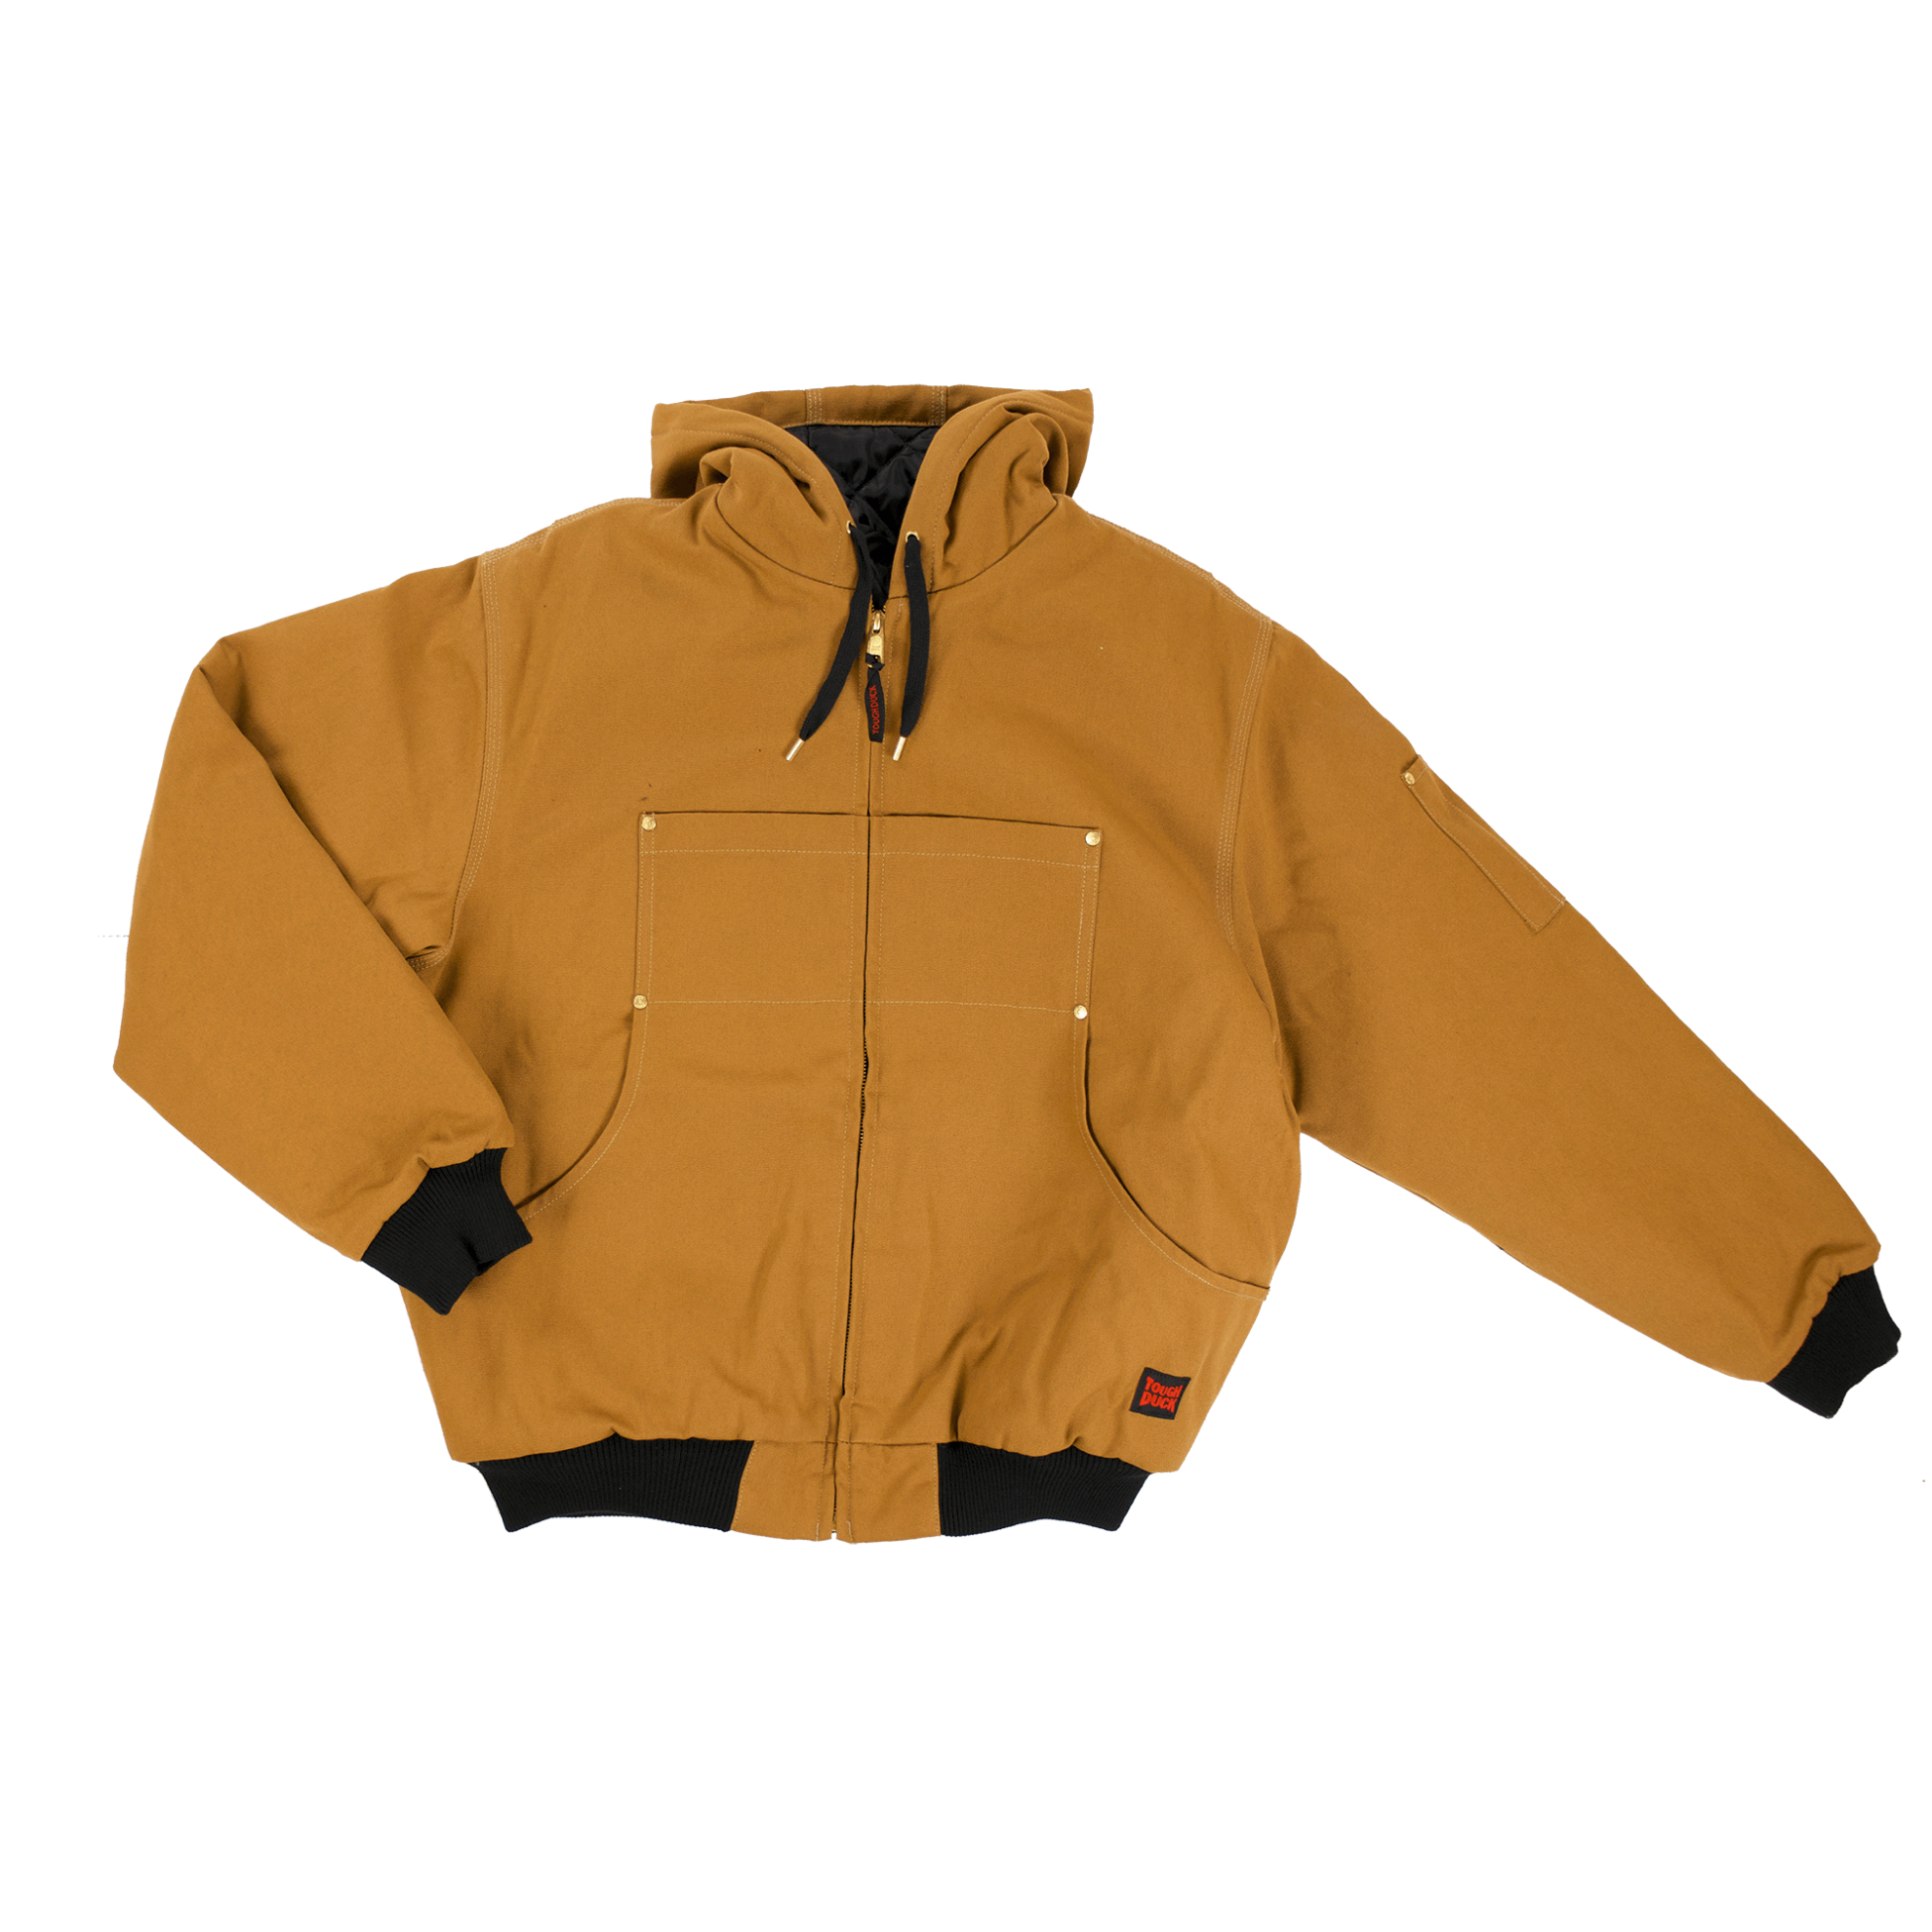 https://www.workcasualwear.ca/images/thumbs/0000116_tough-duck-hooded-duck-bomber-jacket.png